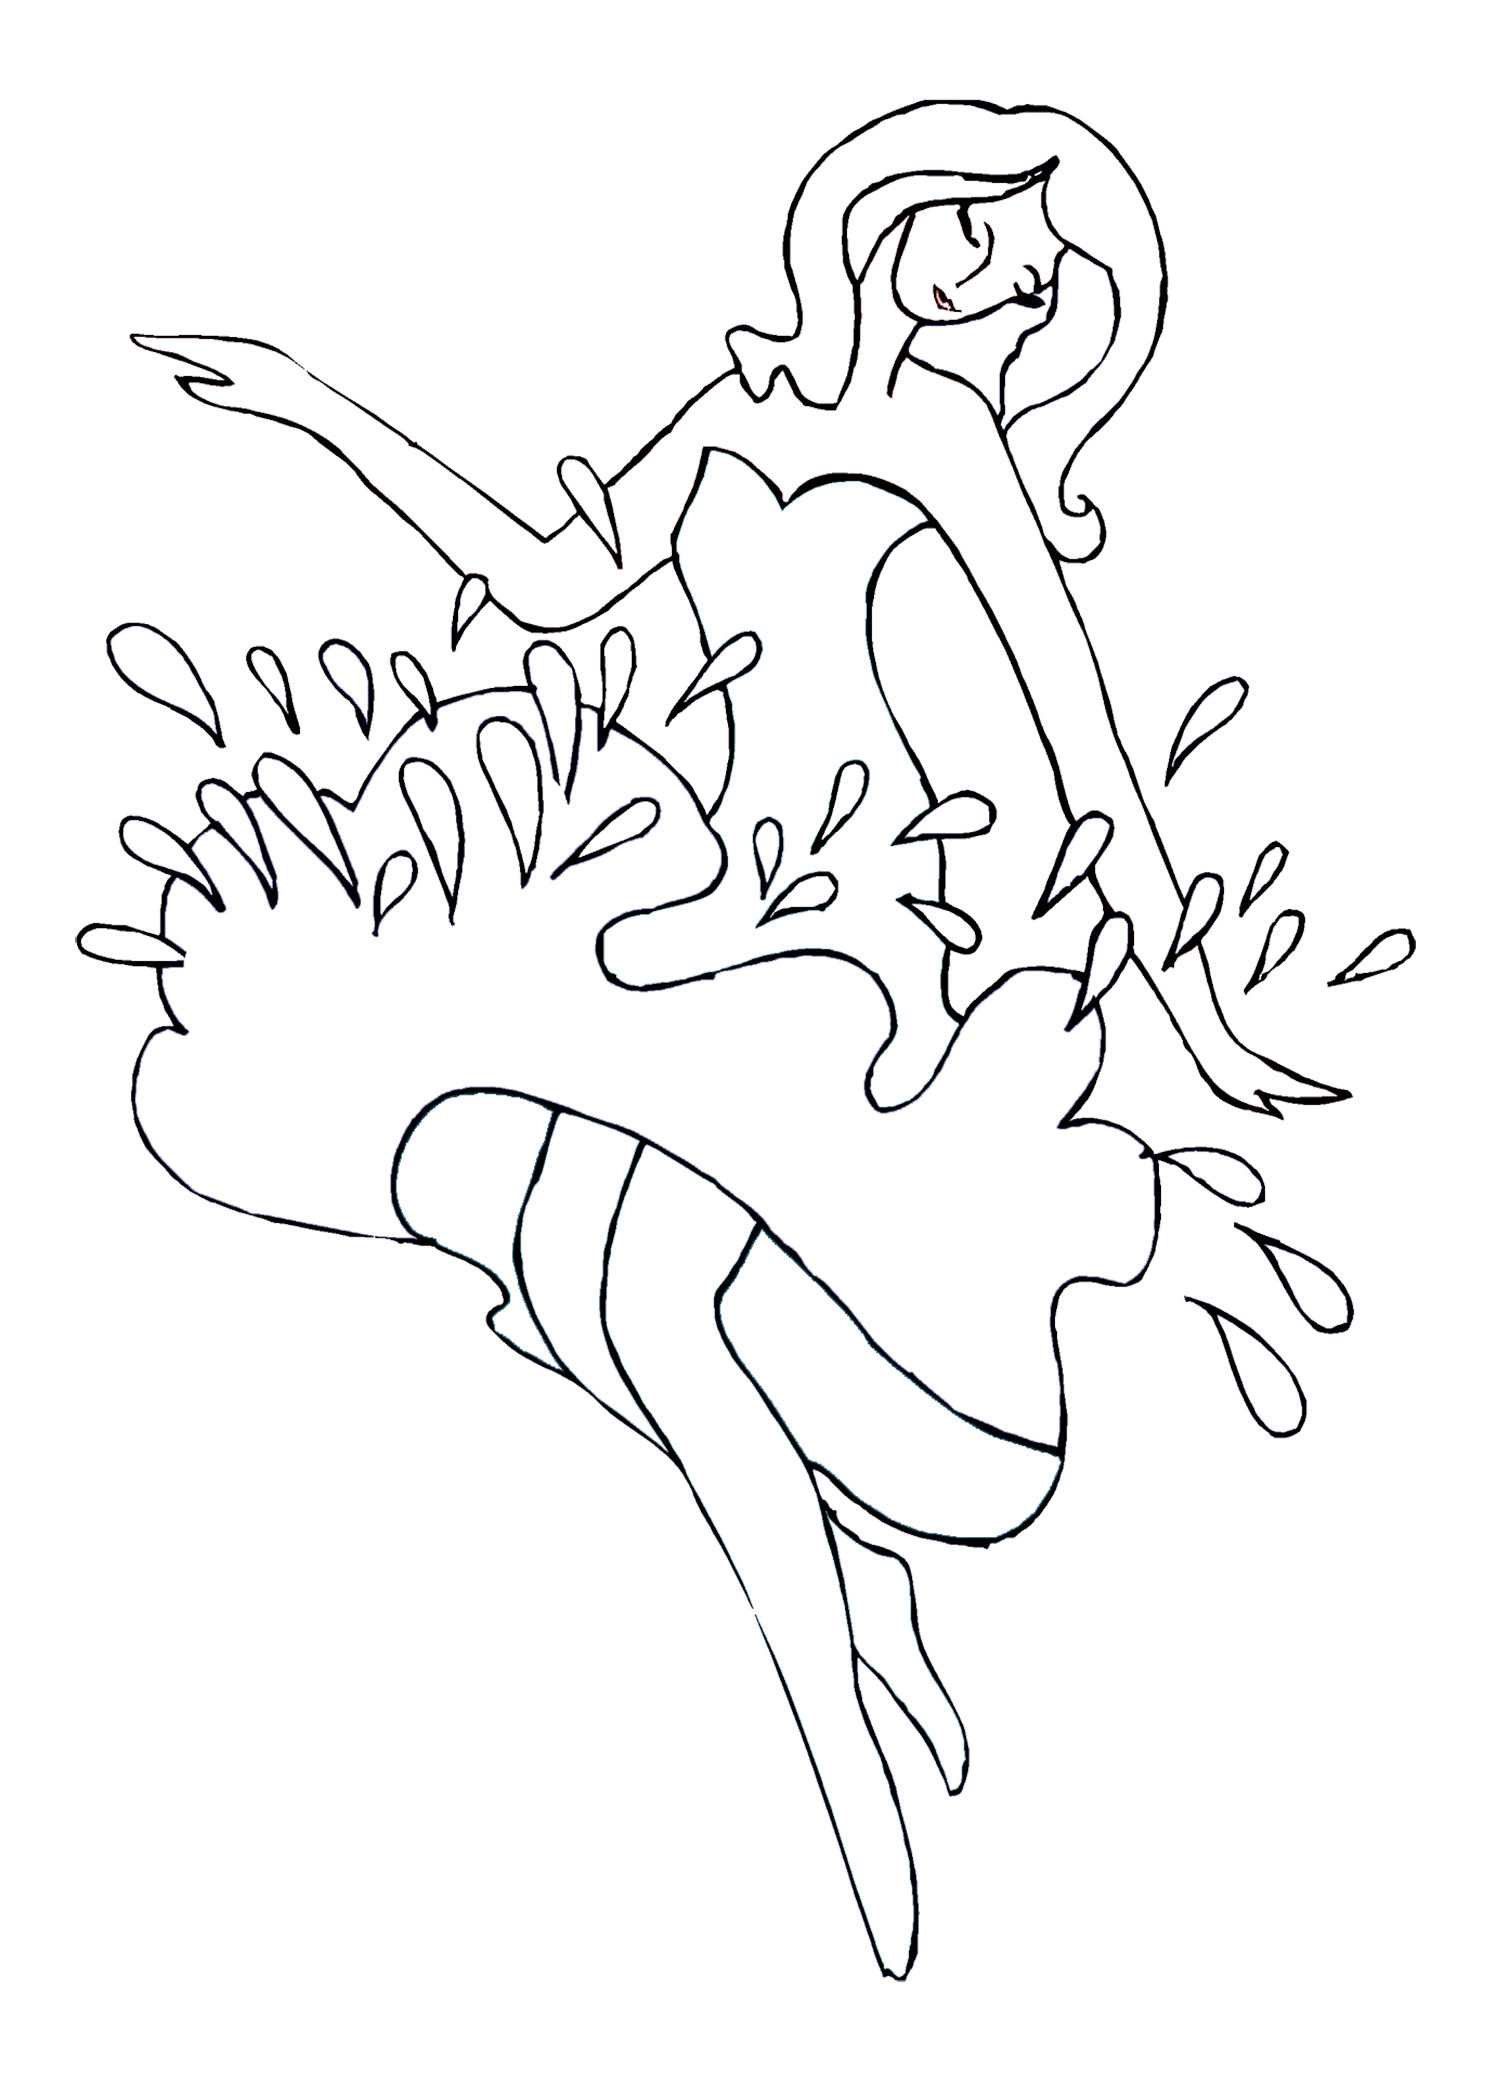 dance coloring page with water drops